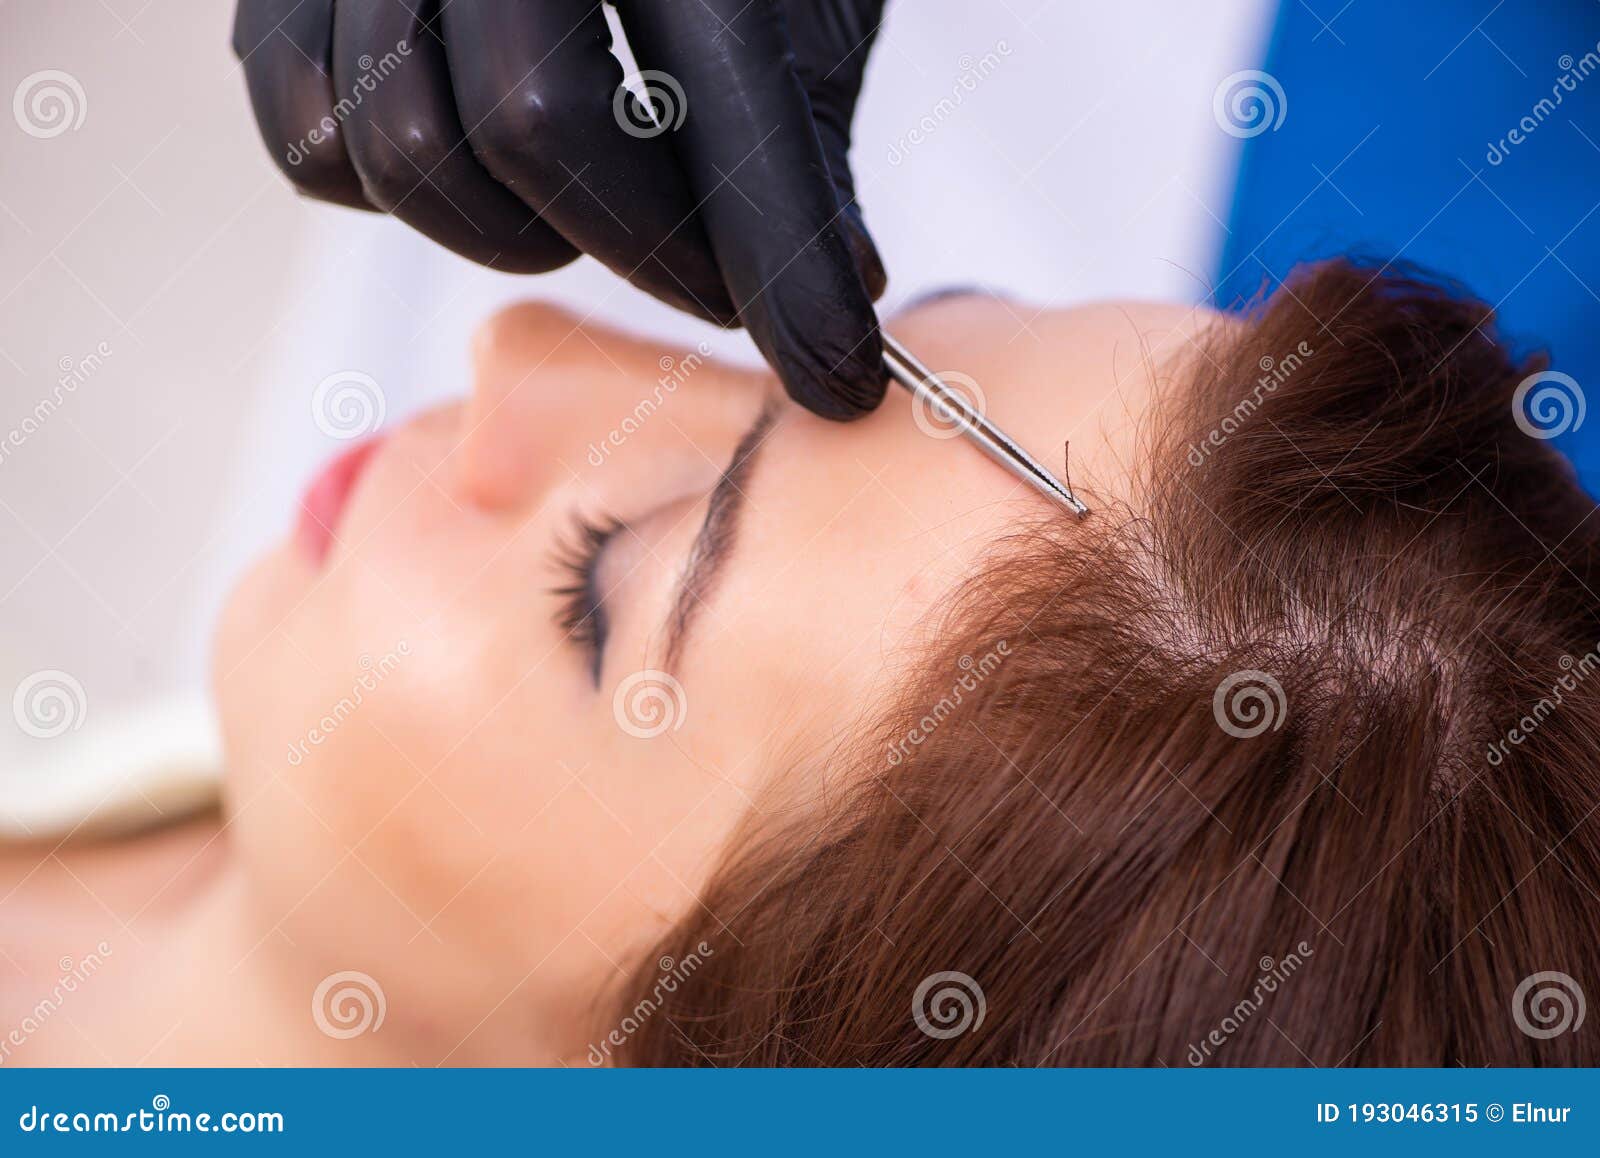 young woman visiting male beautician in hair transplantation con